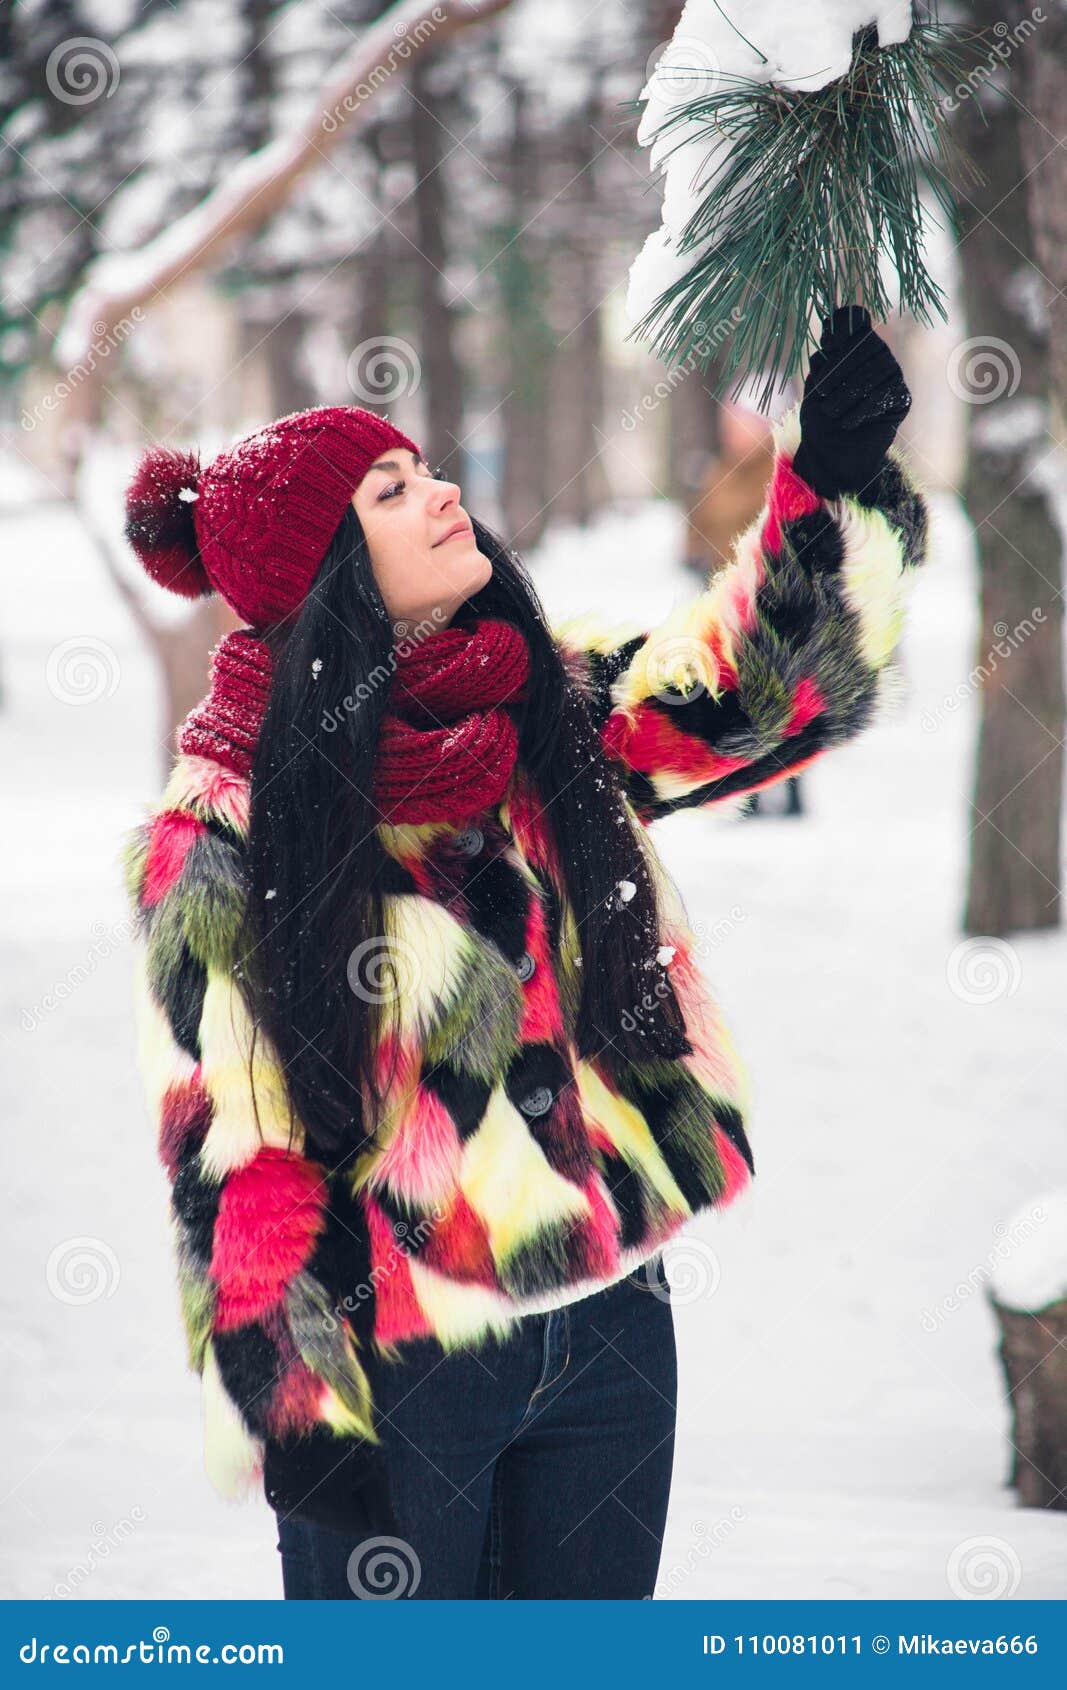 The Girl is Standing Under a Spruce Branch Stock Image - Image of ...